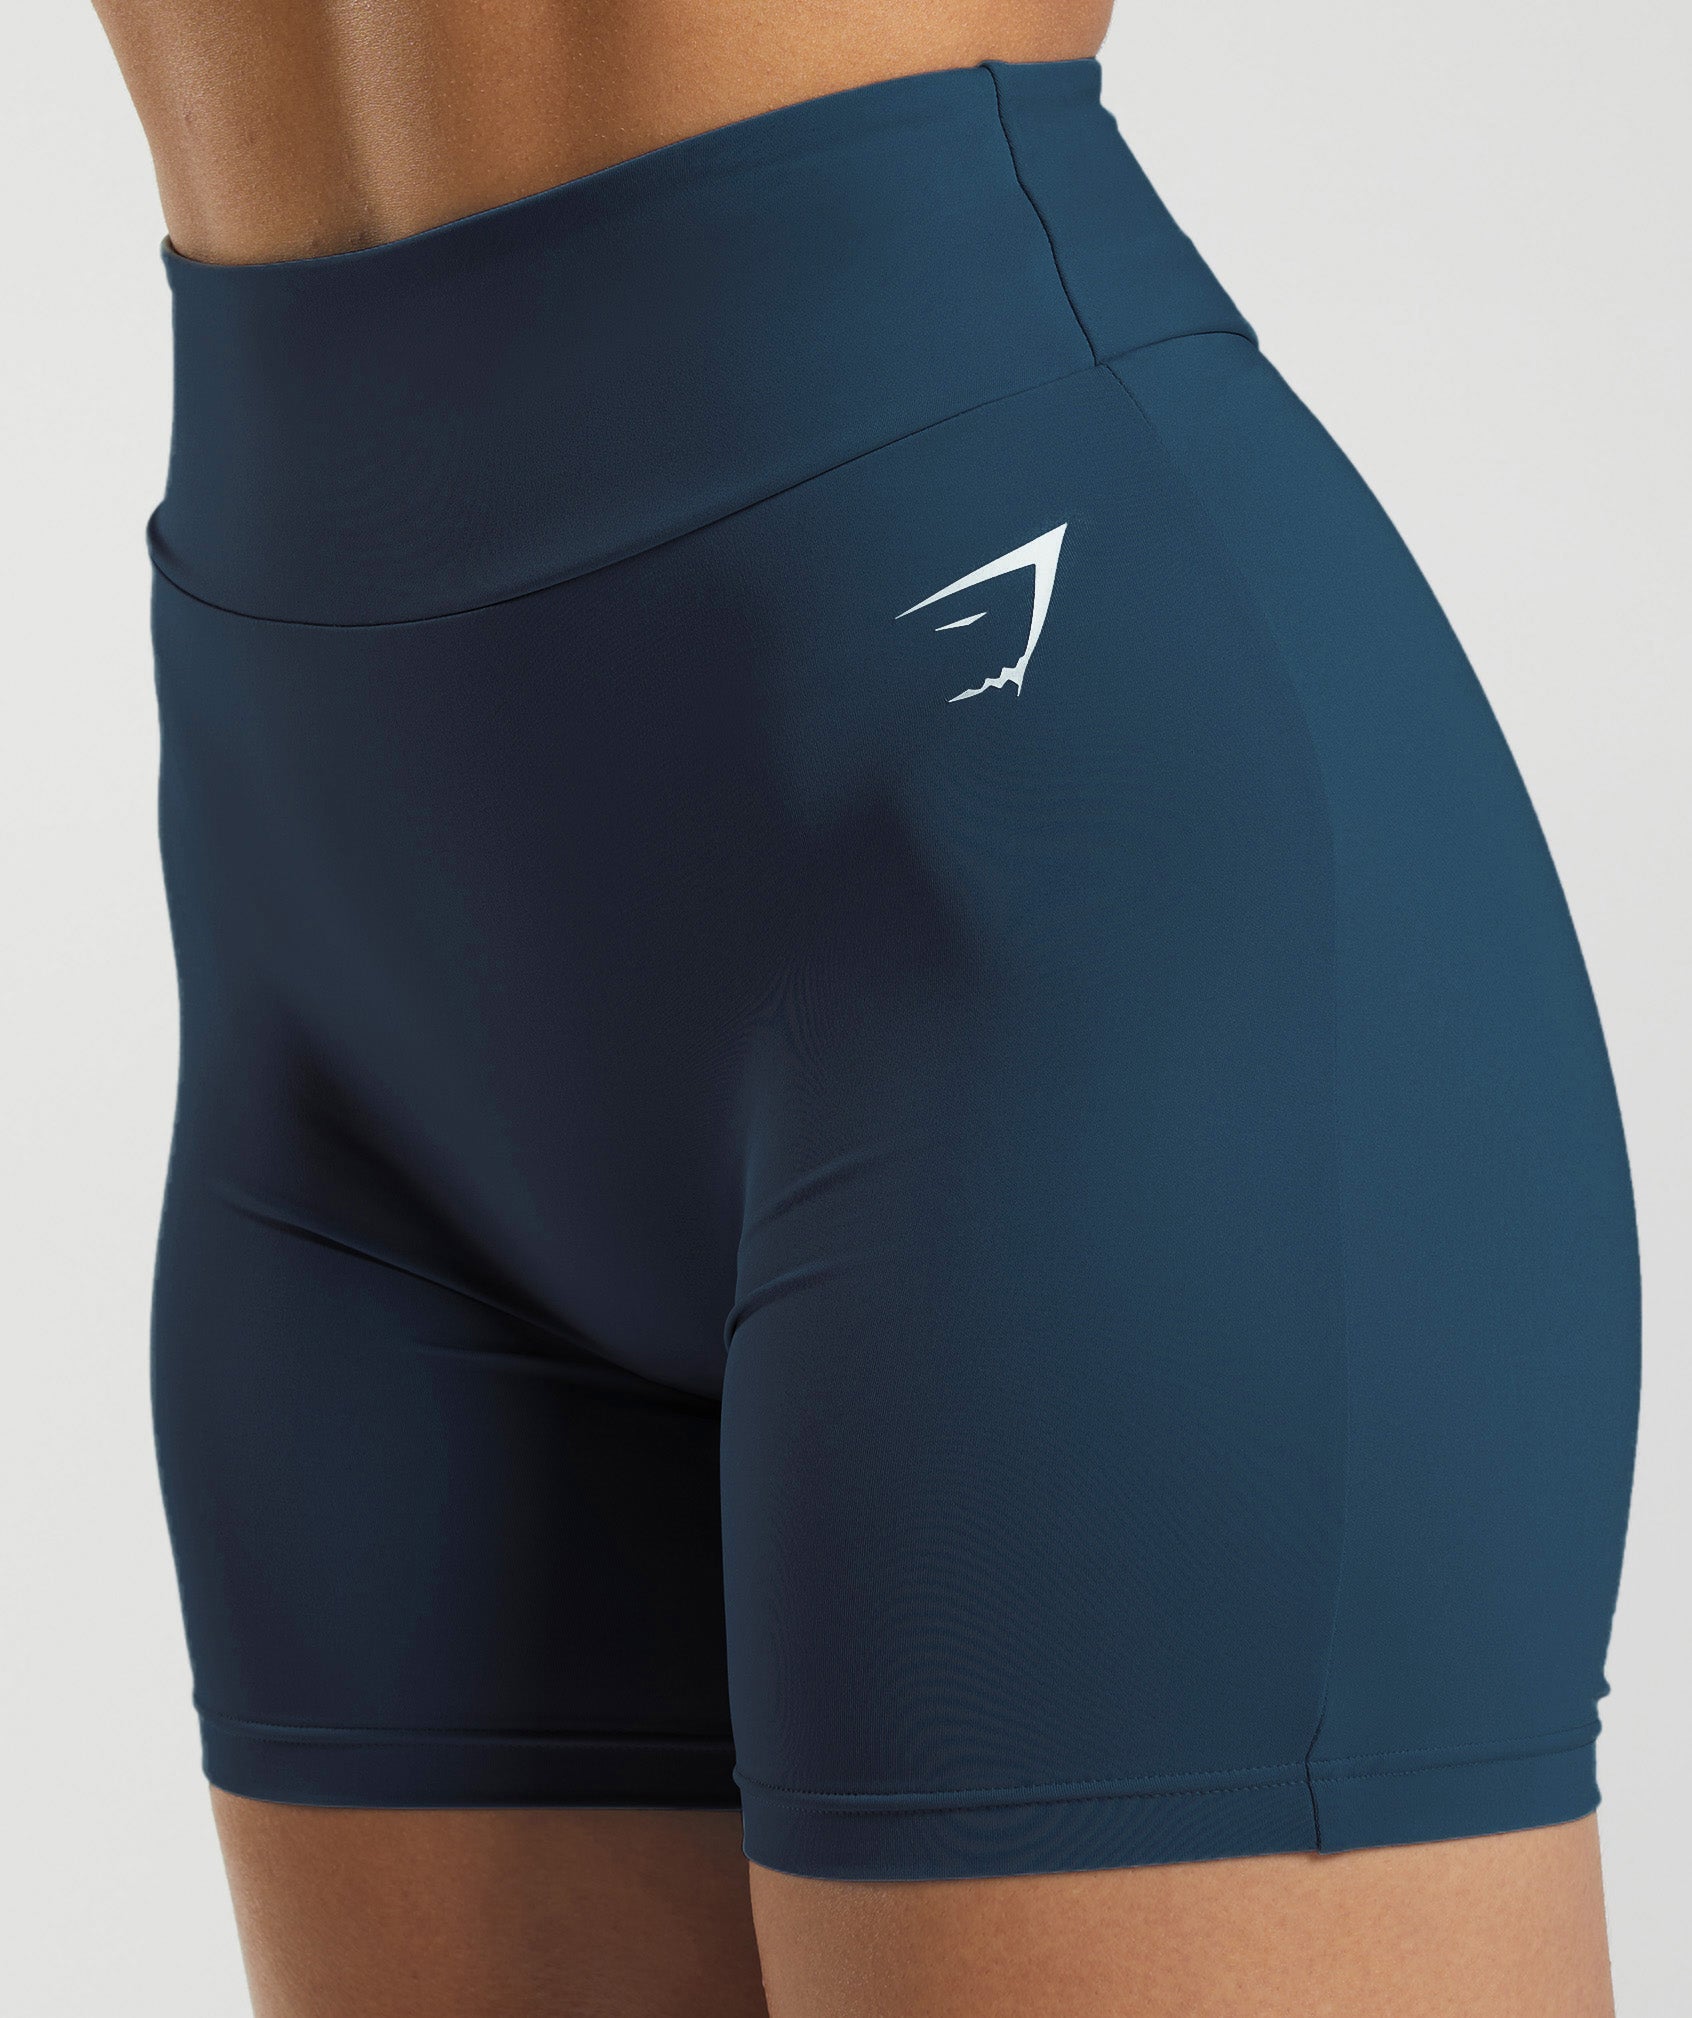 GS Power Original Tight Shorts in Navy - view 6